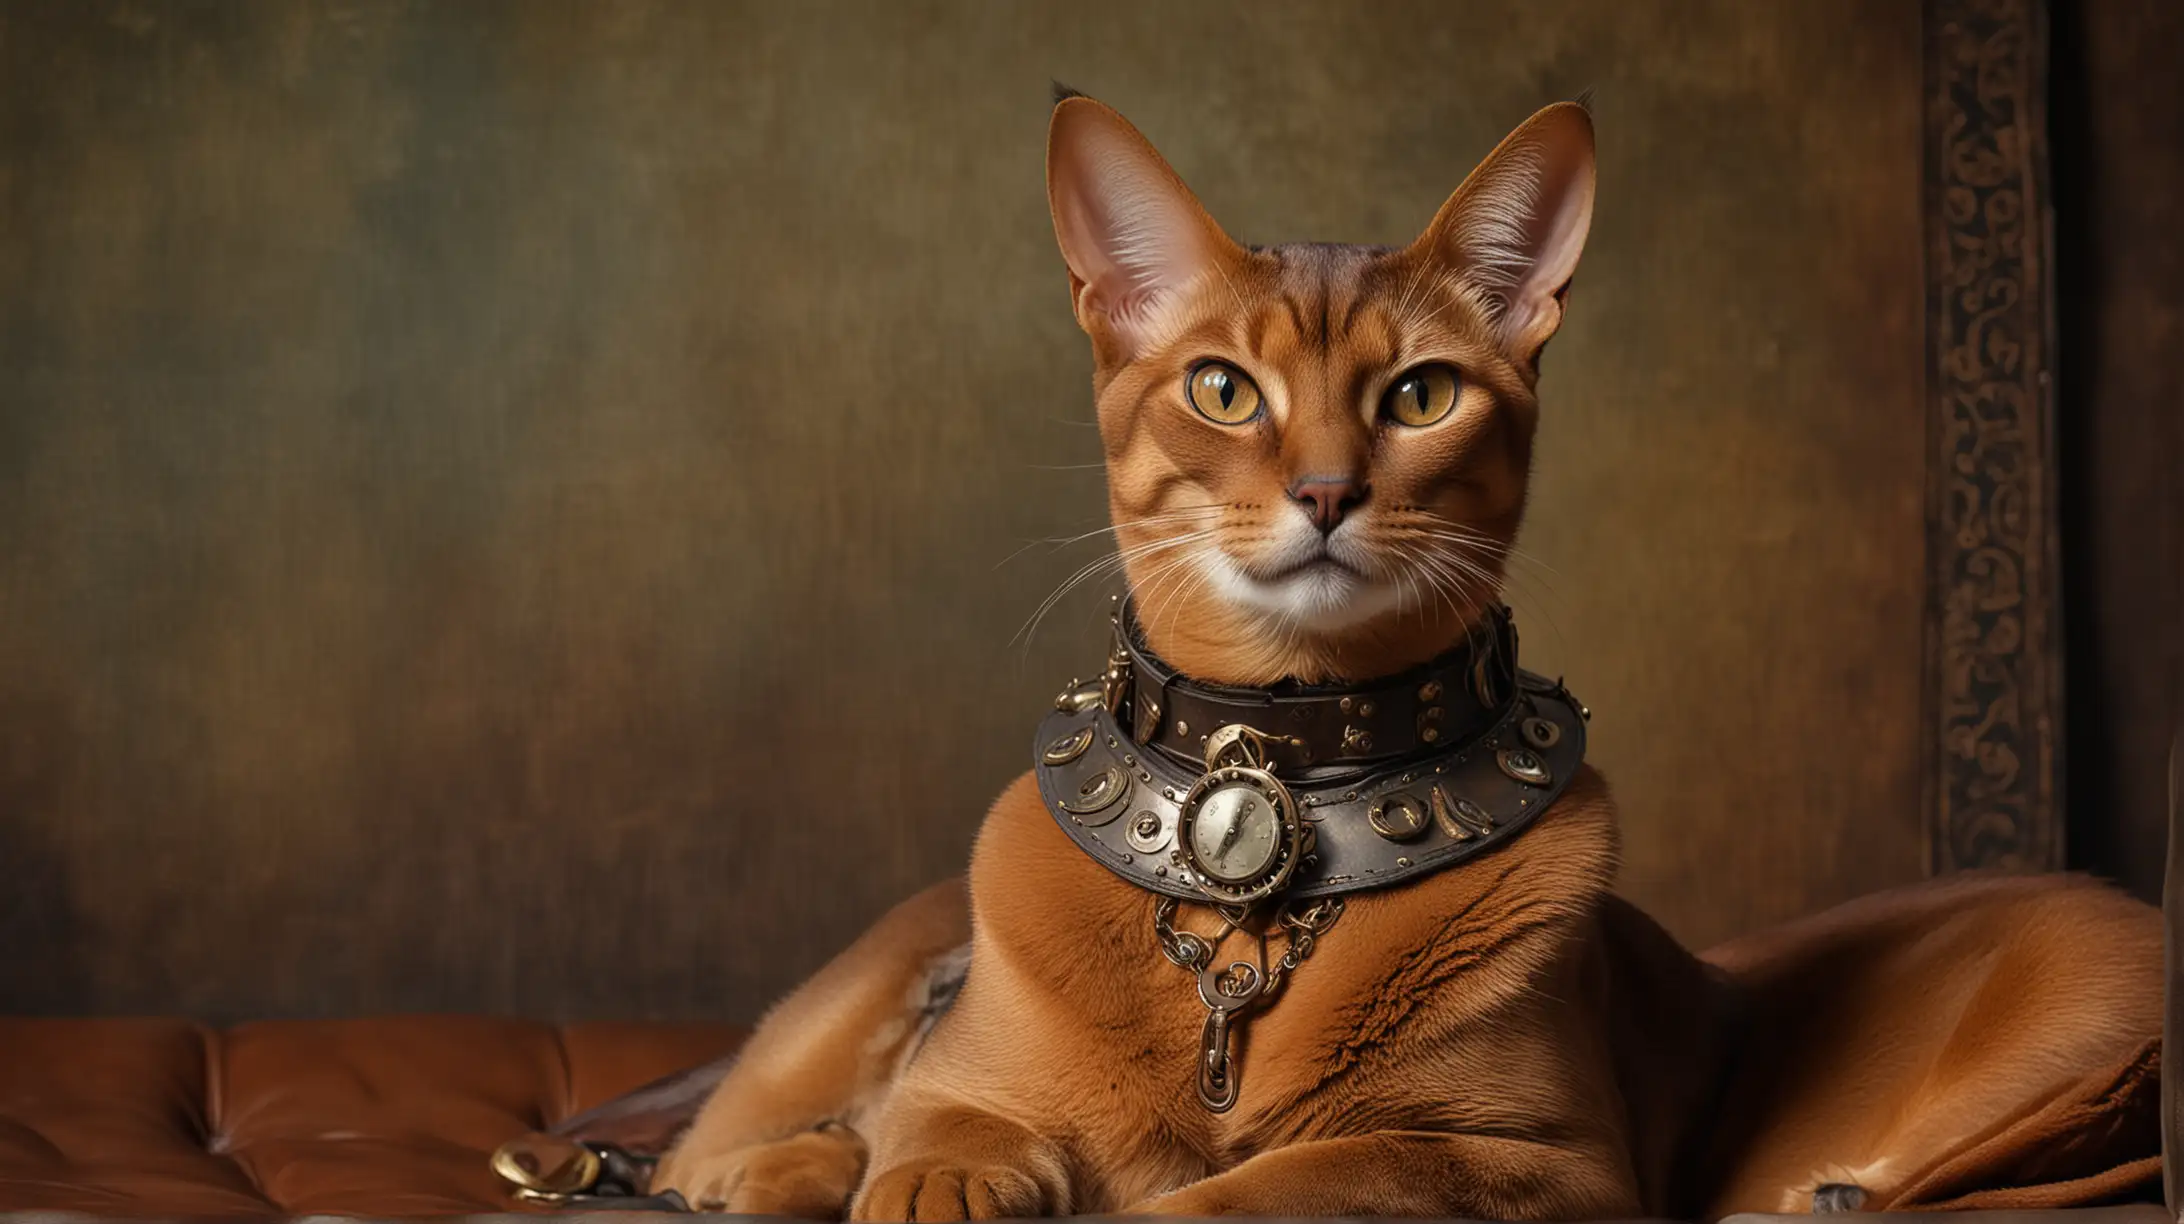 the portrait of the abyssinian cat with a steampunk collar on a leather sofa, old dutch painting masters style